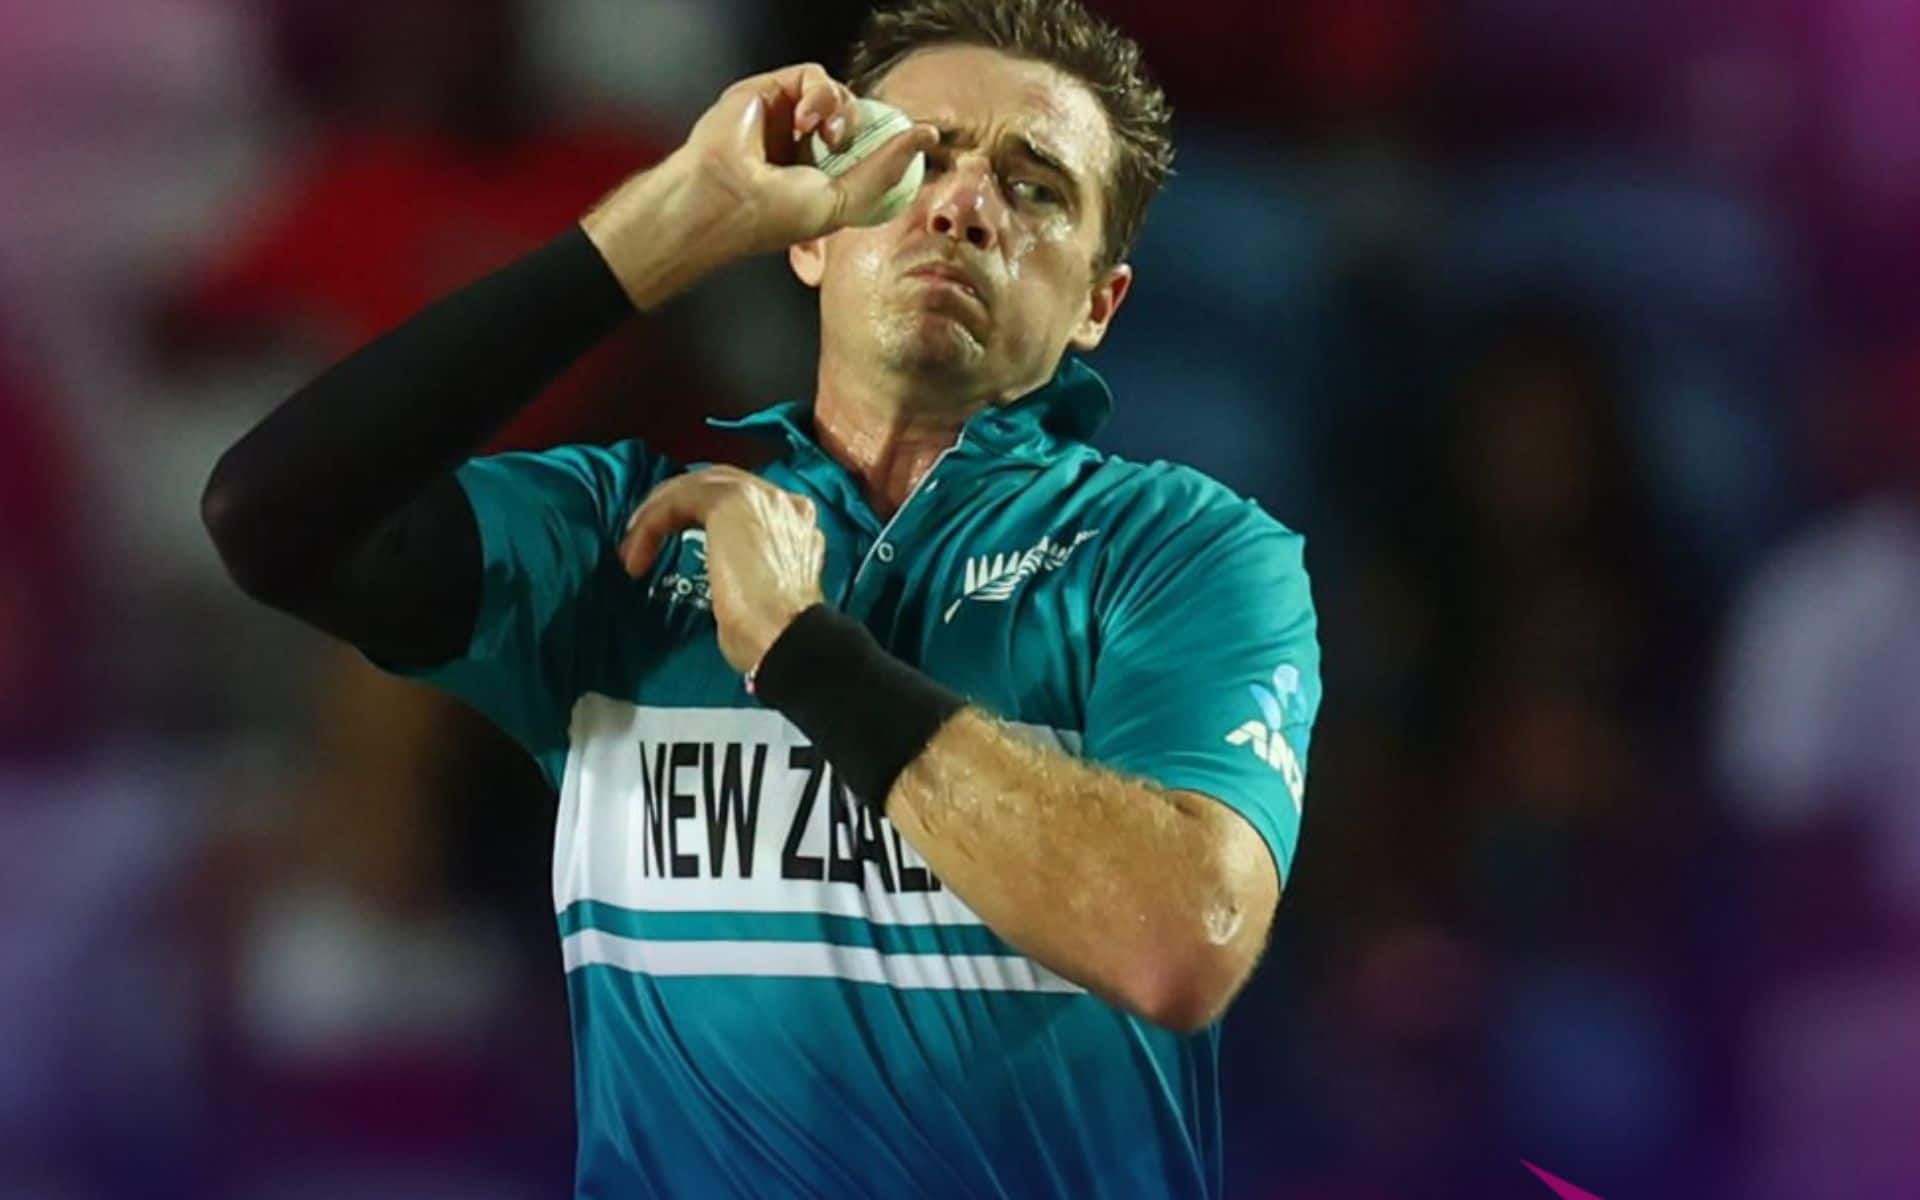 Tim Southee Charged With Breach Of ICC Code Of Conduct That Deals With Equipment Abuse